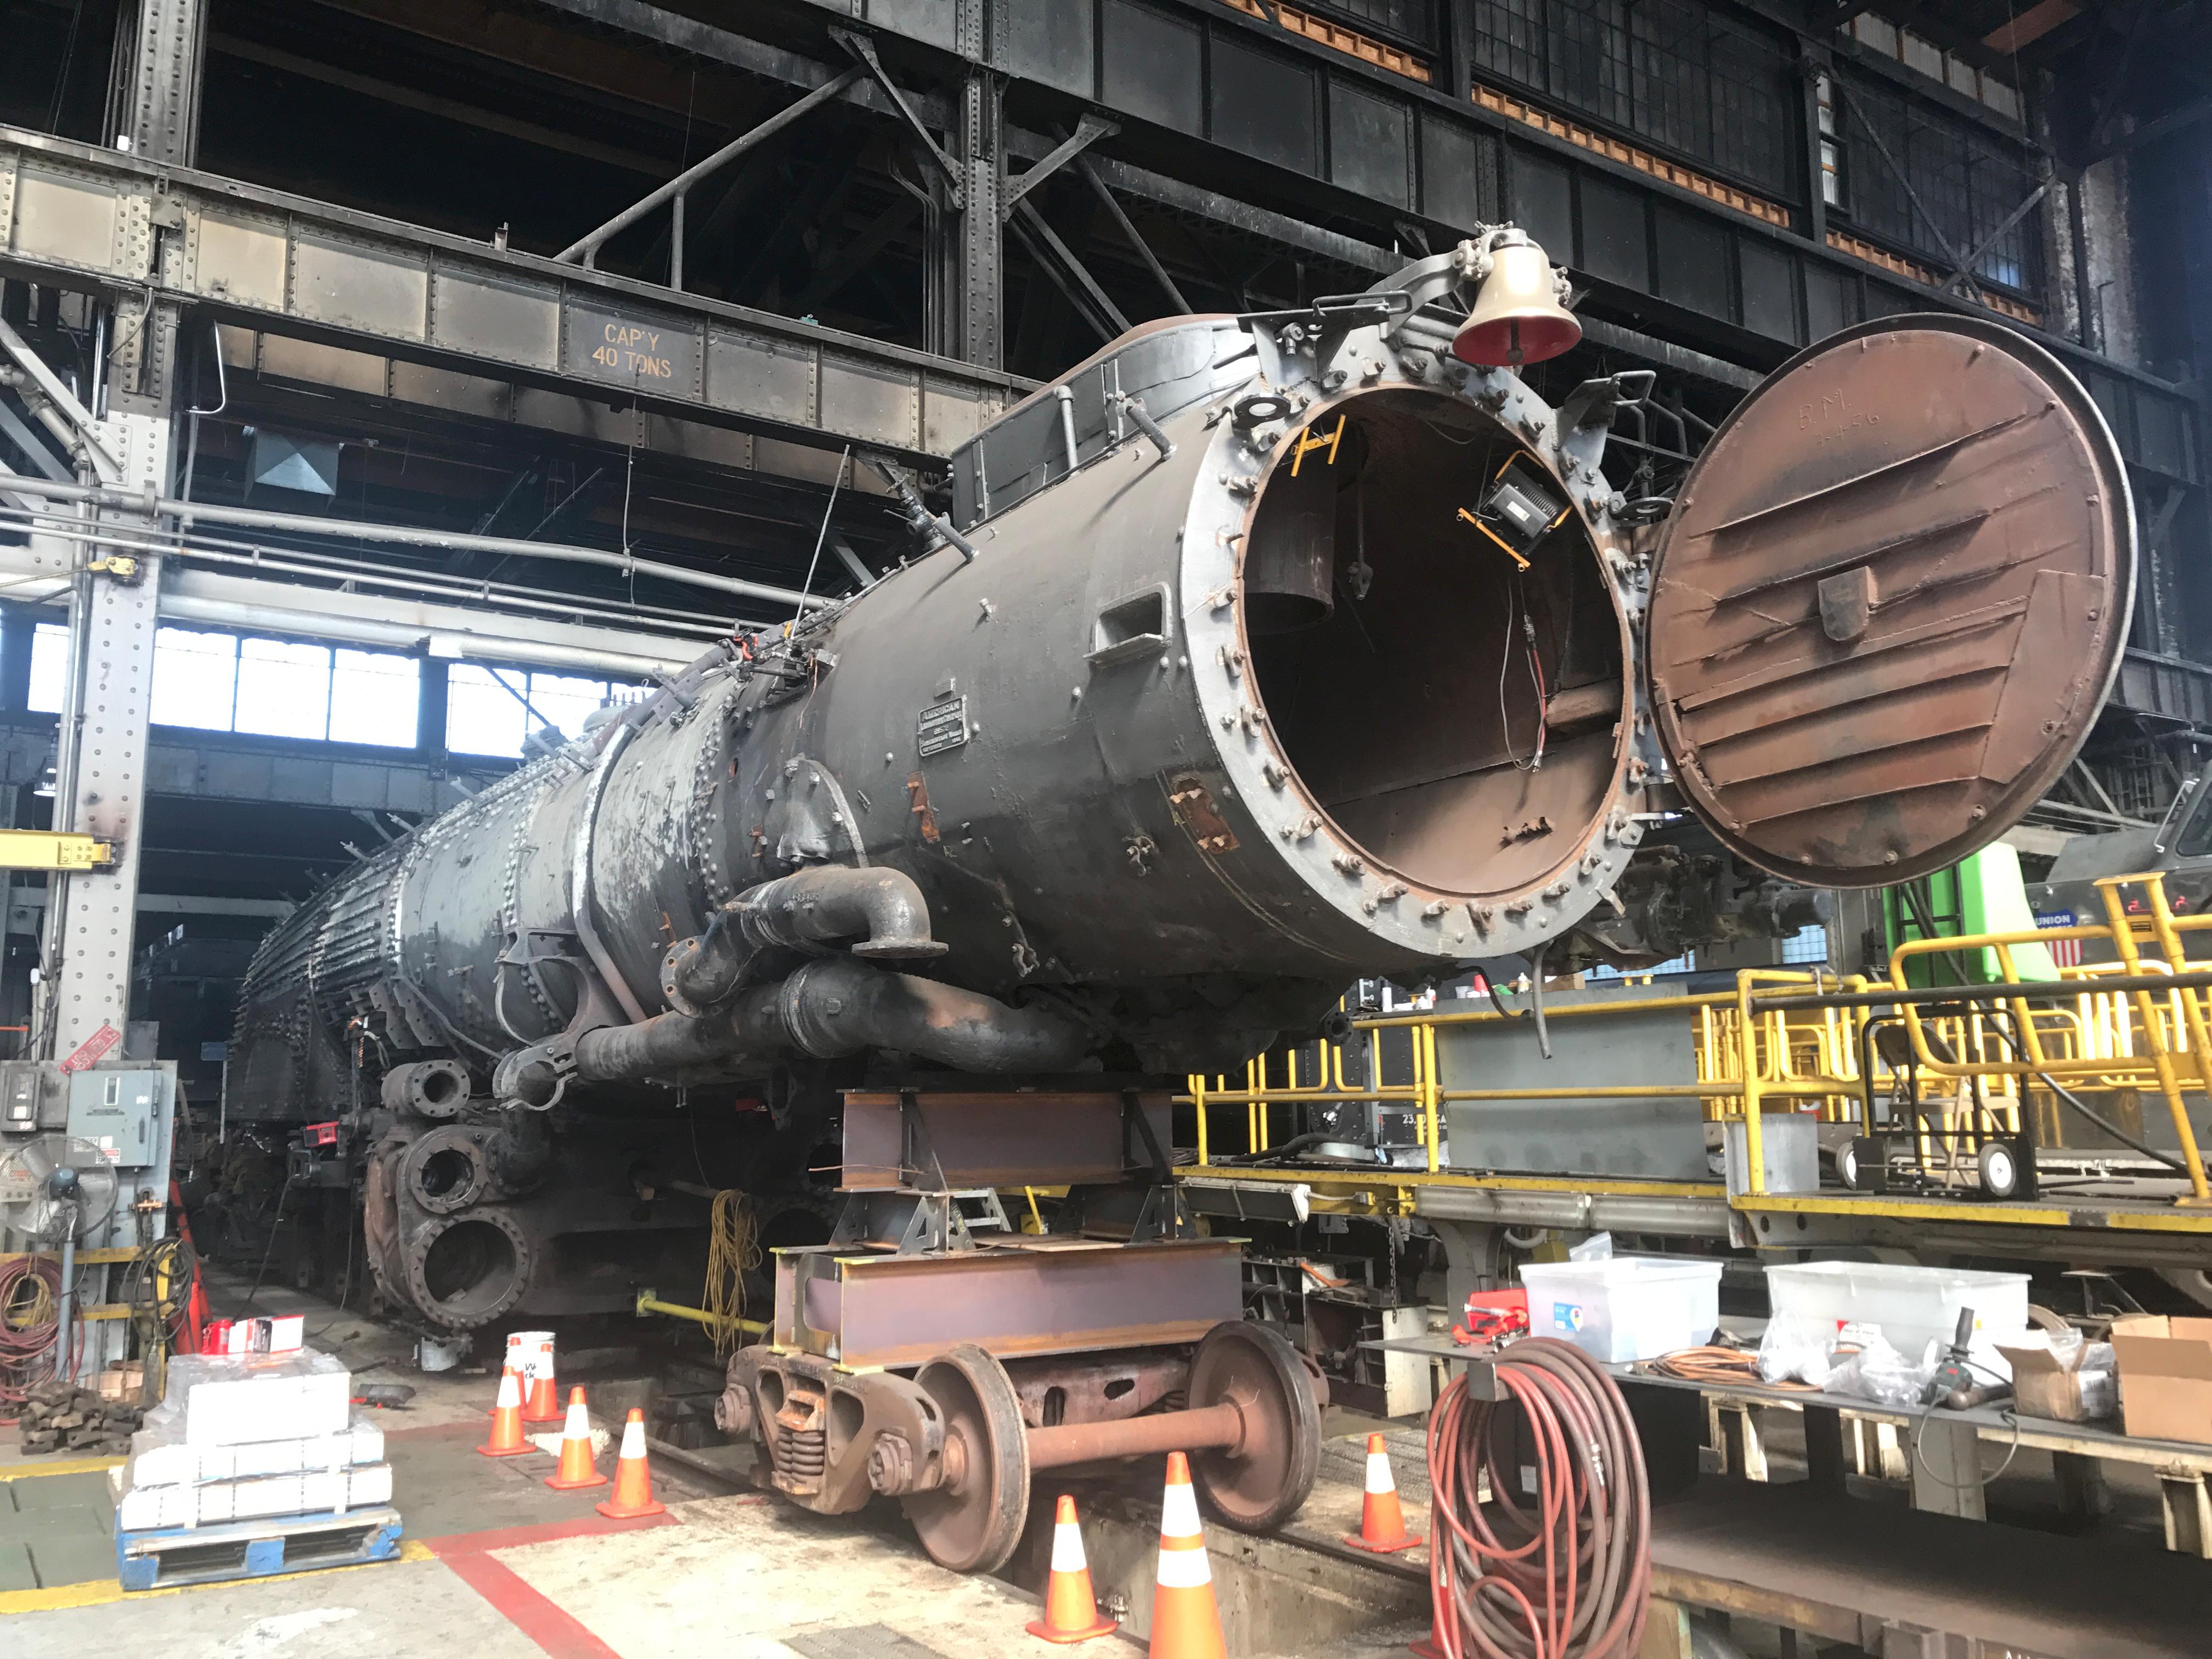 Disassembled Big Boy in May 2017.